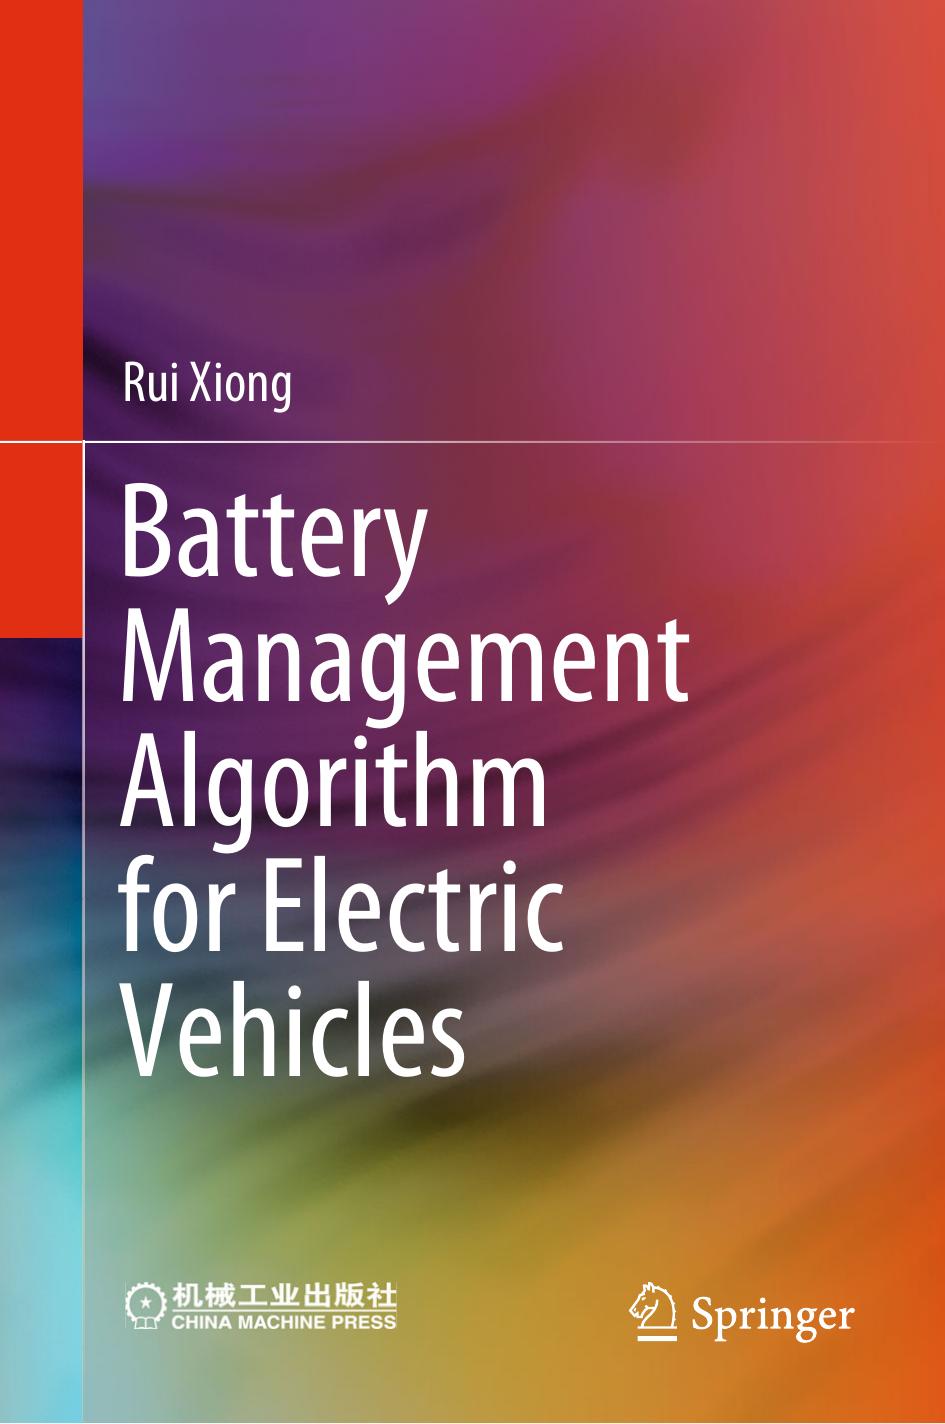 Battery Management Algorithm for Electric Vehicles by Rui Xiong